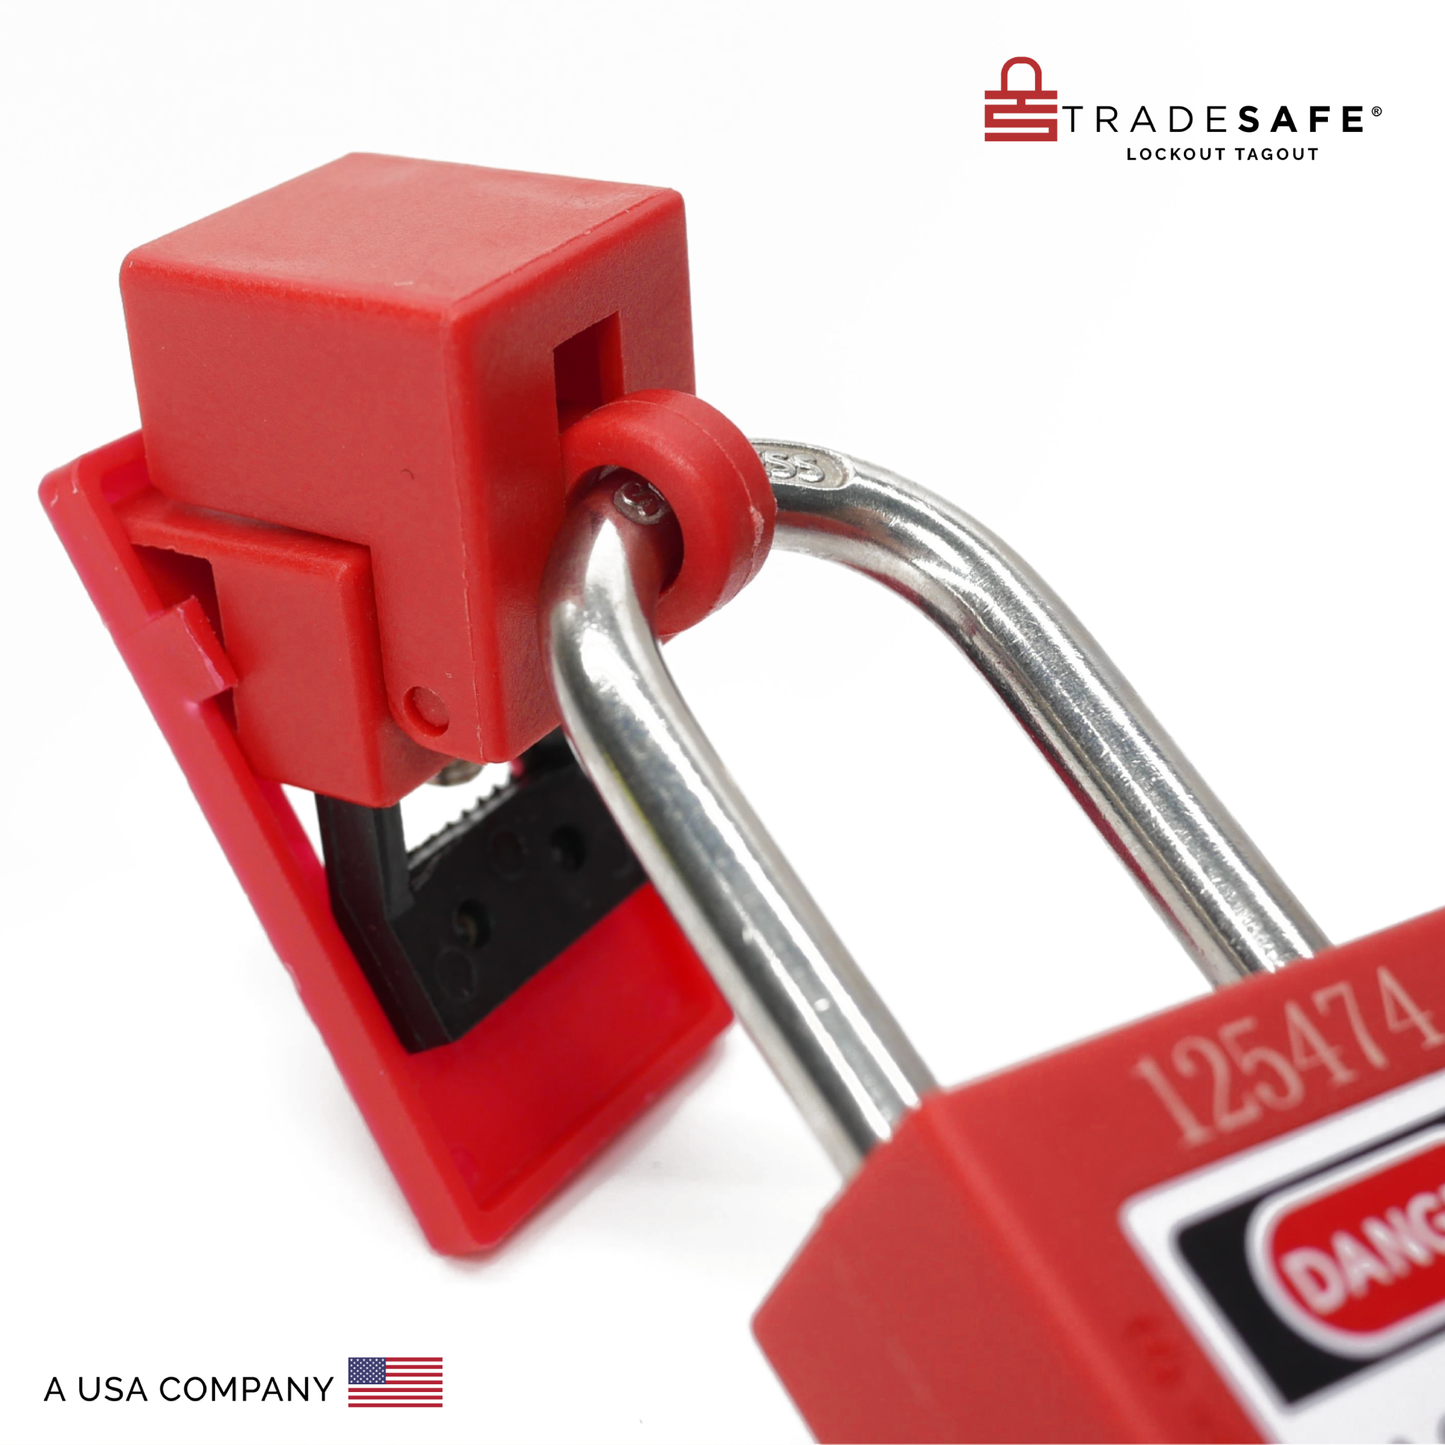 eye-level of the product in side view with red padlock